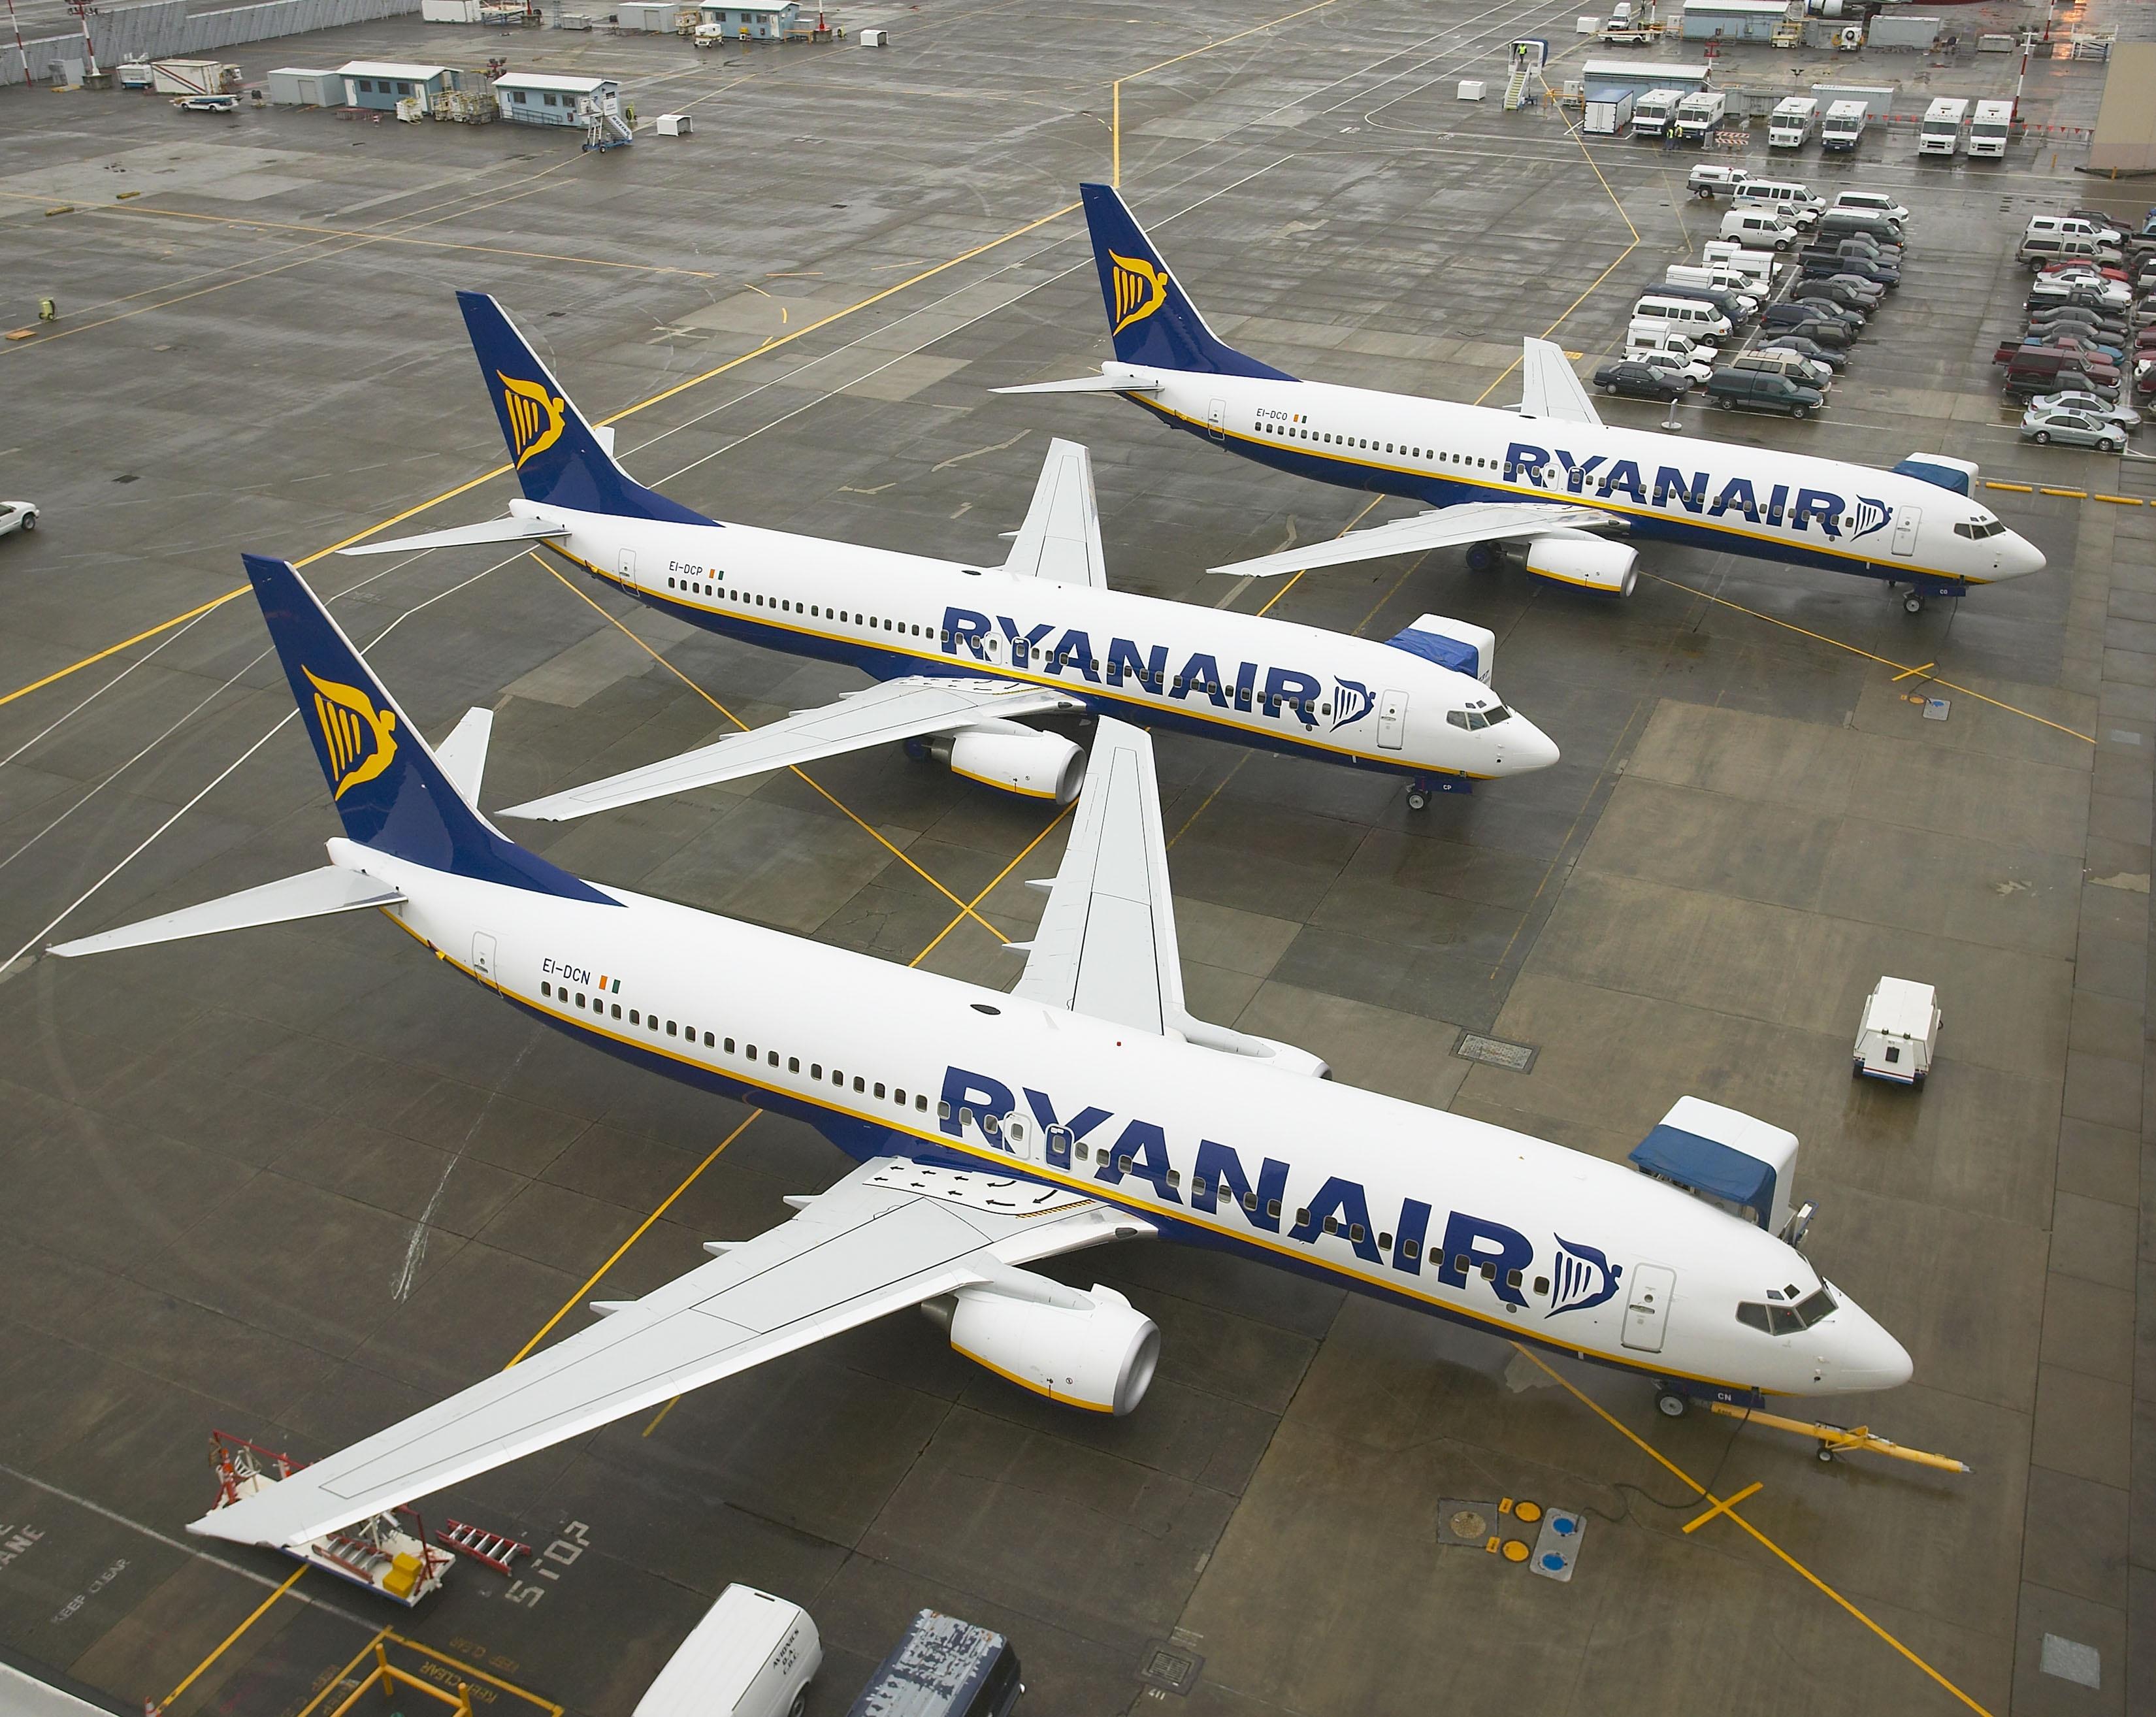 Ryanair’s Week-Long ‘Black Friday’ Promotion Continues